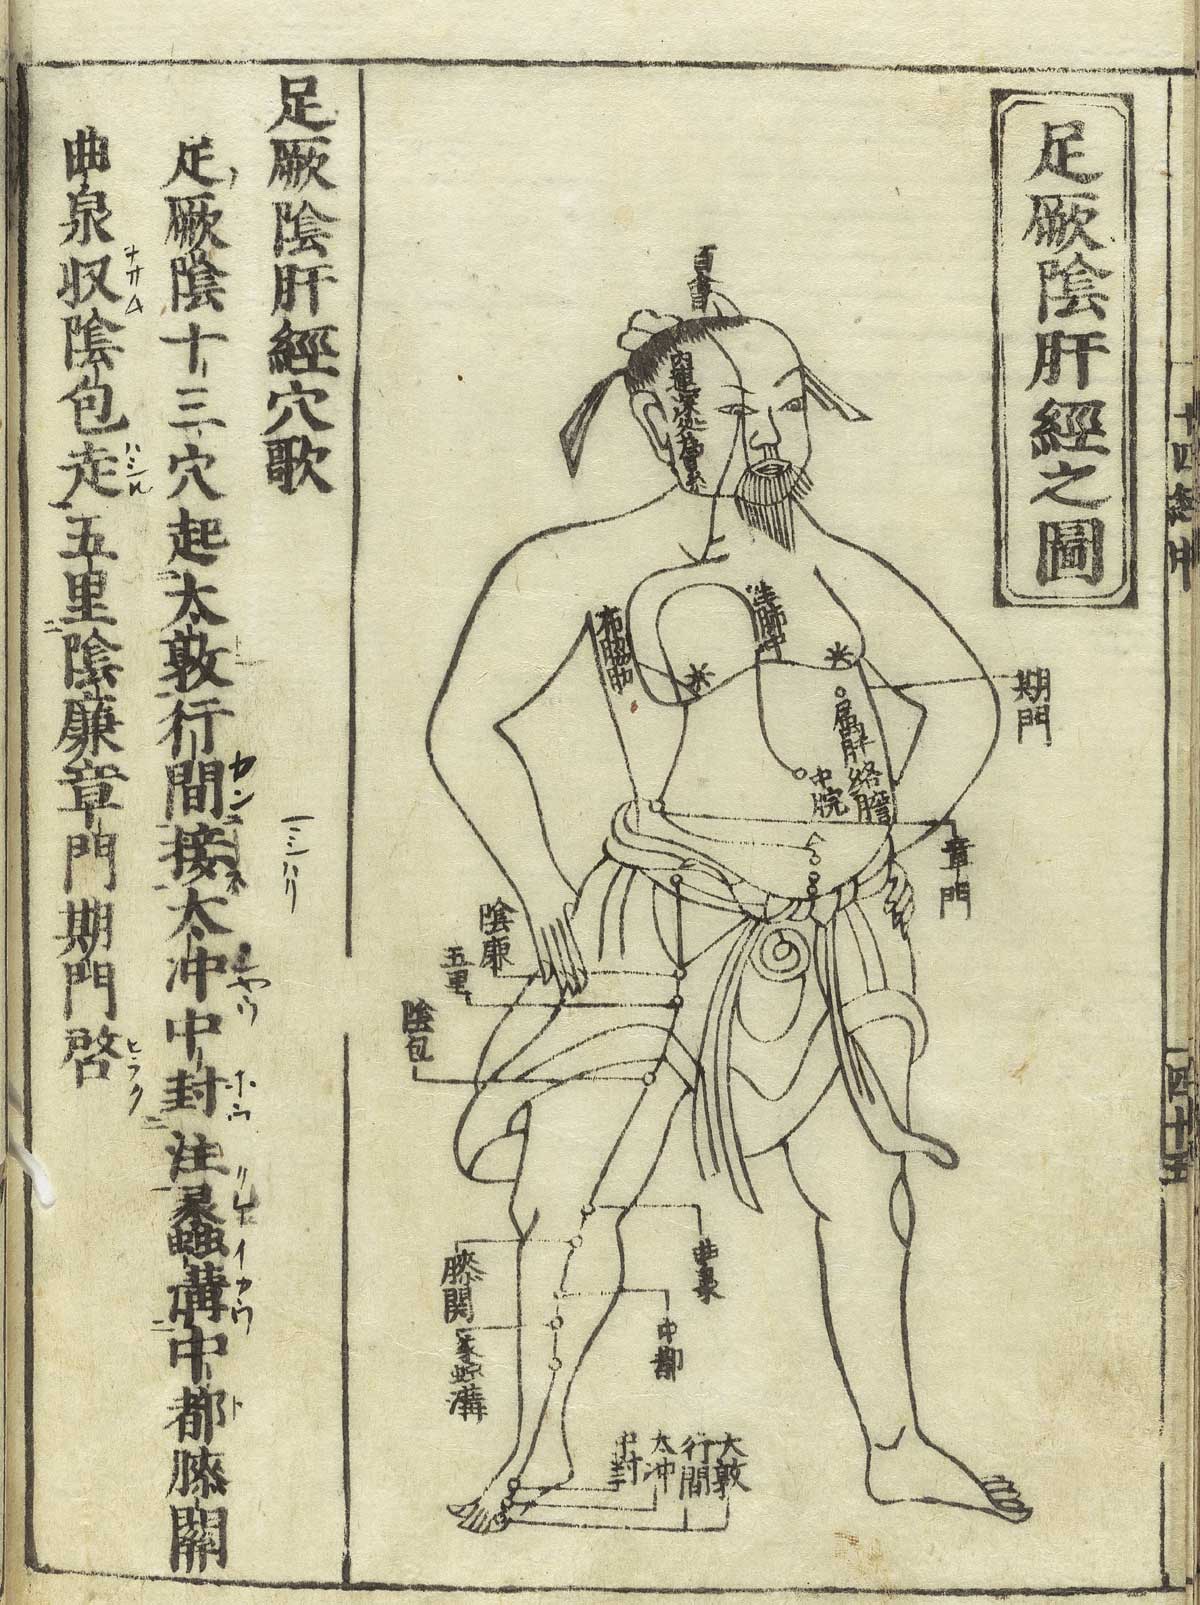 Woodcut showing the Jueyin liver meridian of foot of a standing male facing figure wearing a loin cloth with meridians indicated down the chest and leg with Chinese characters giving names of the points, from Hua Shou’s Jushikei hakki, NLM Call no.: WZ 260 H868s 1716.